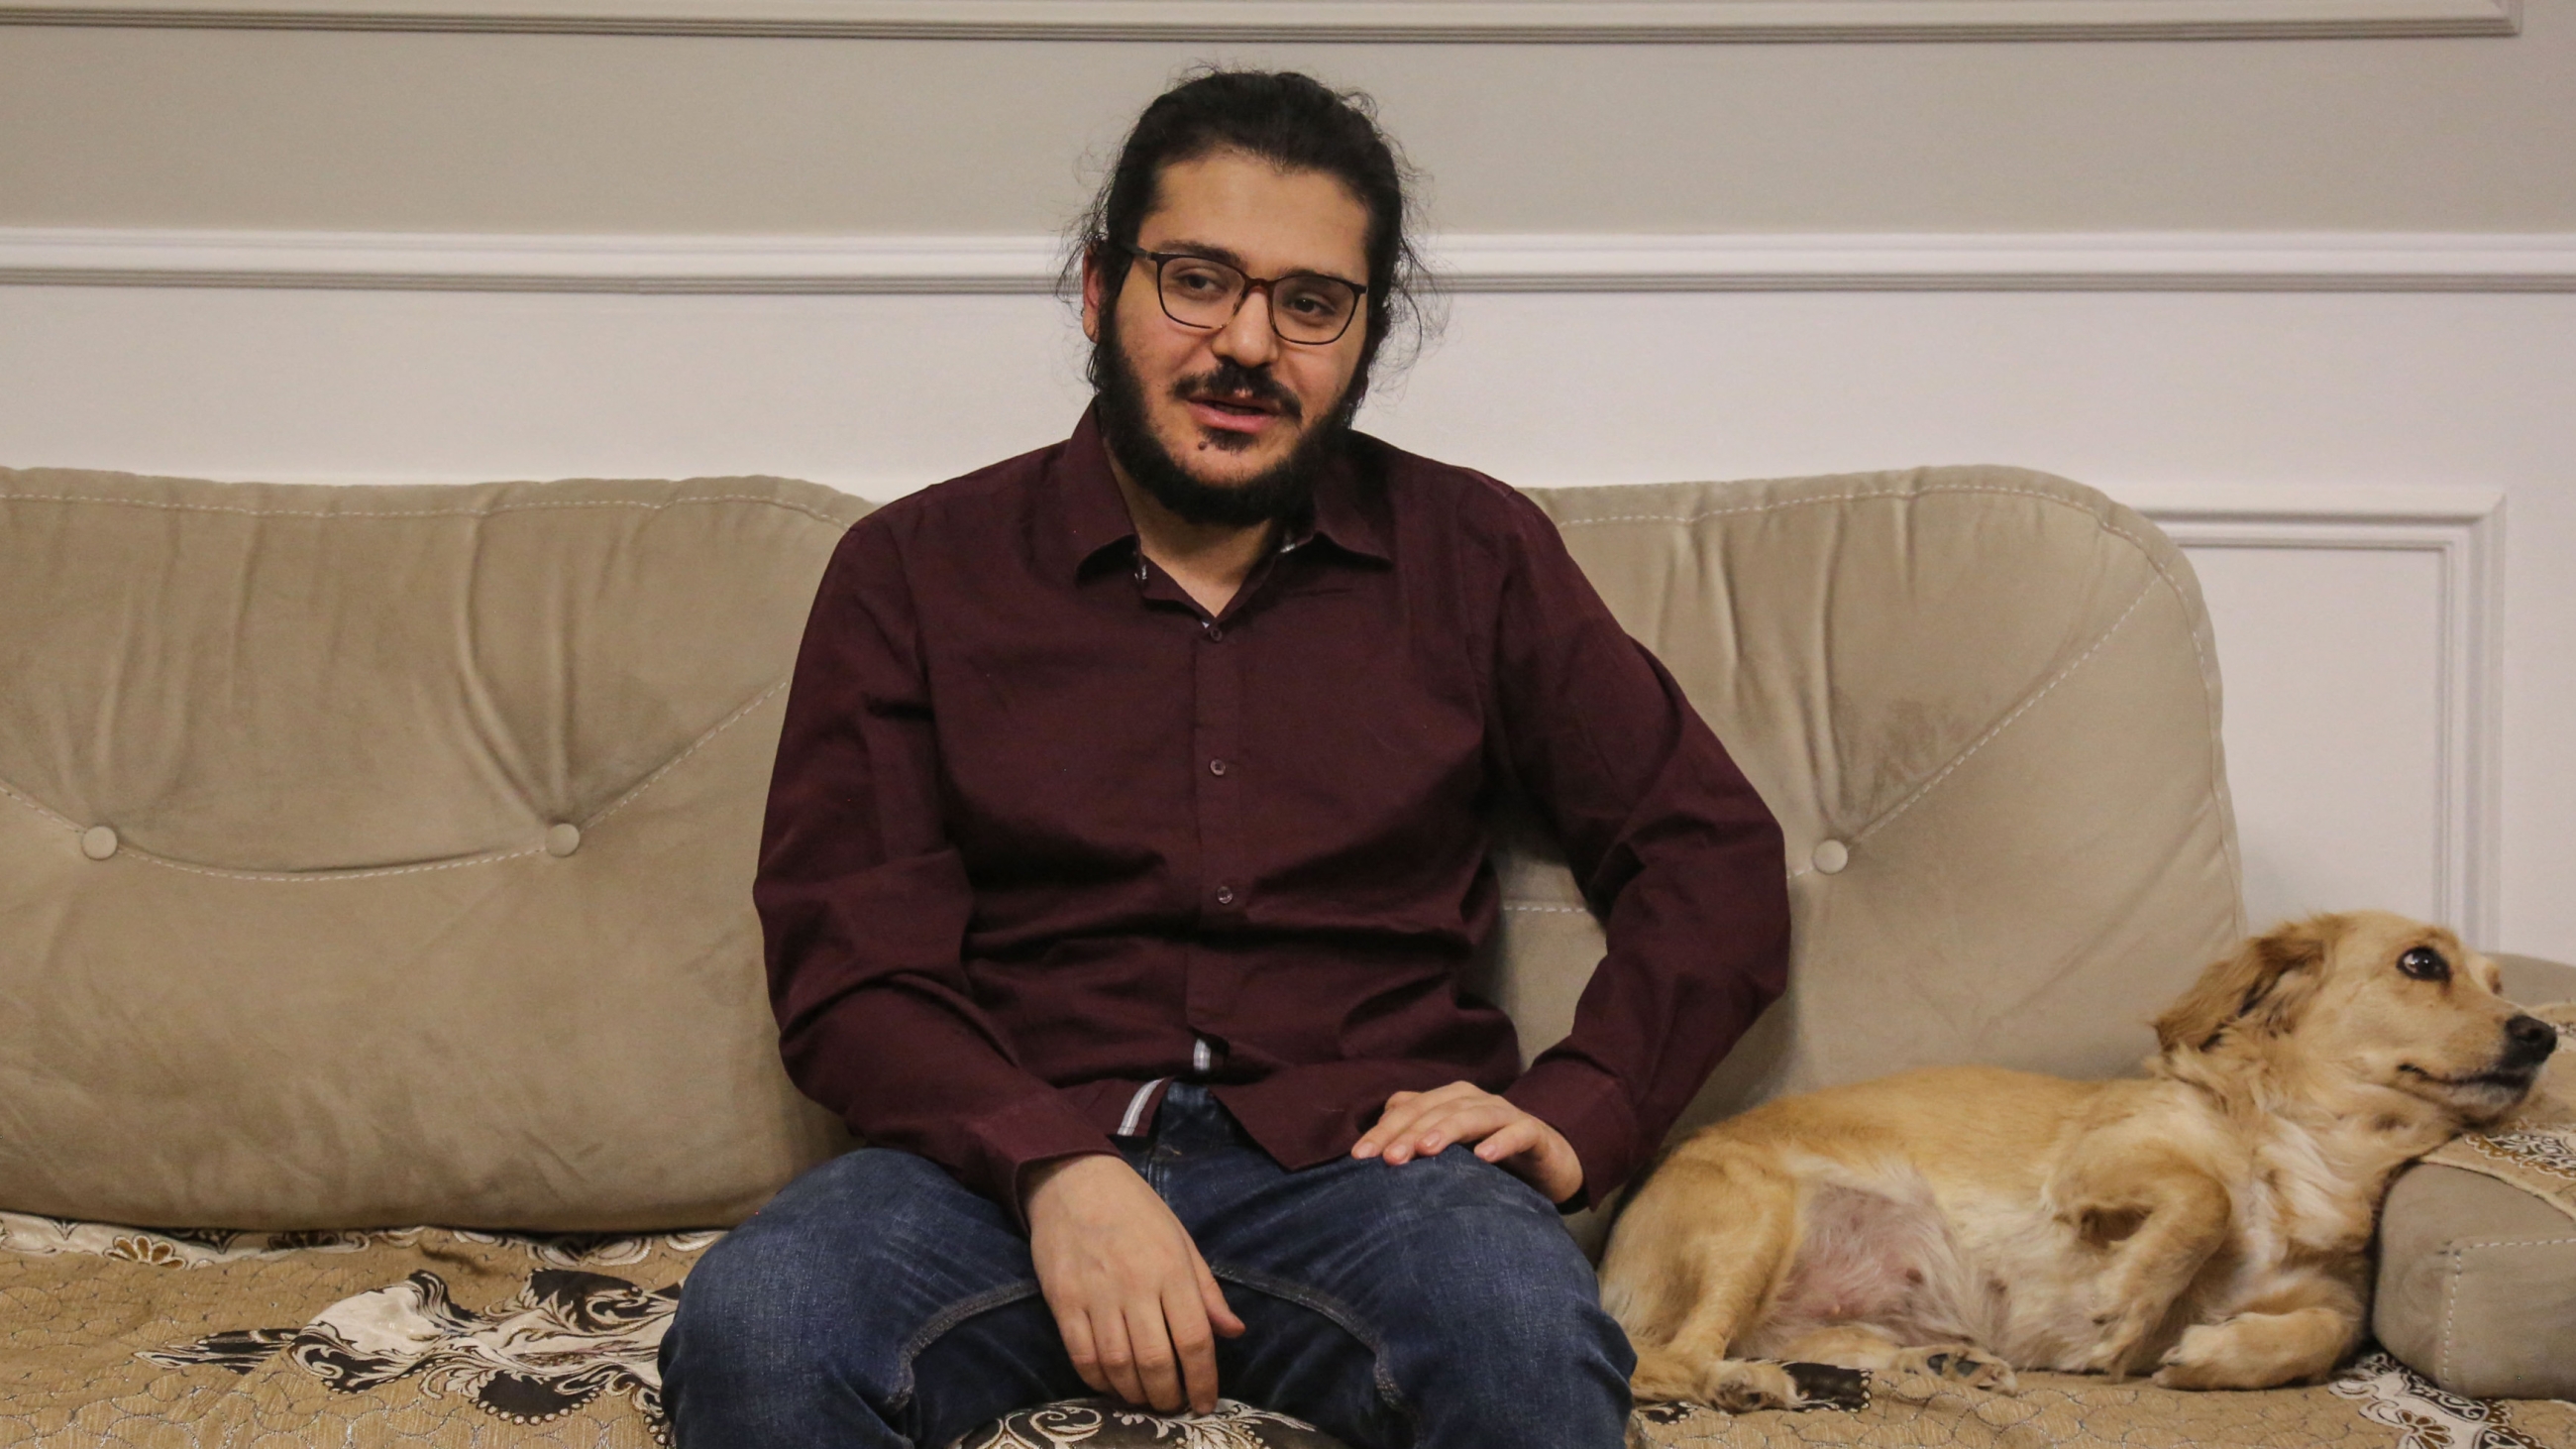 Egyptian researcher Patrick Zaki is pictured next to a dog at his family home in Cairo, on 9 December 2021 (AFP)